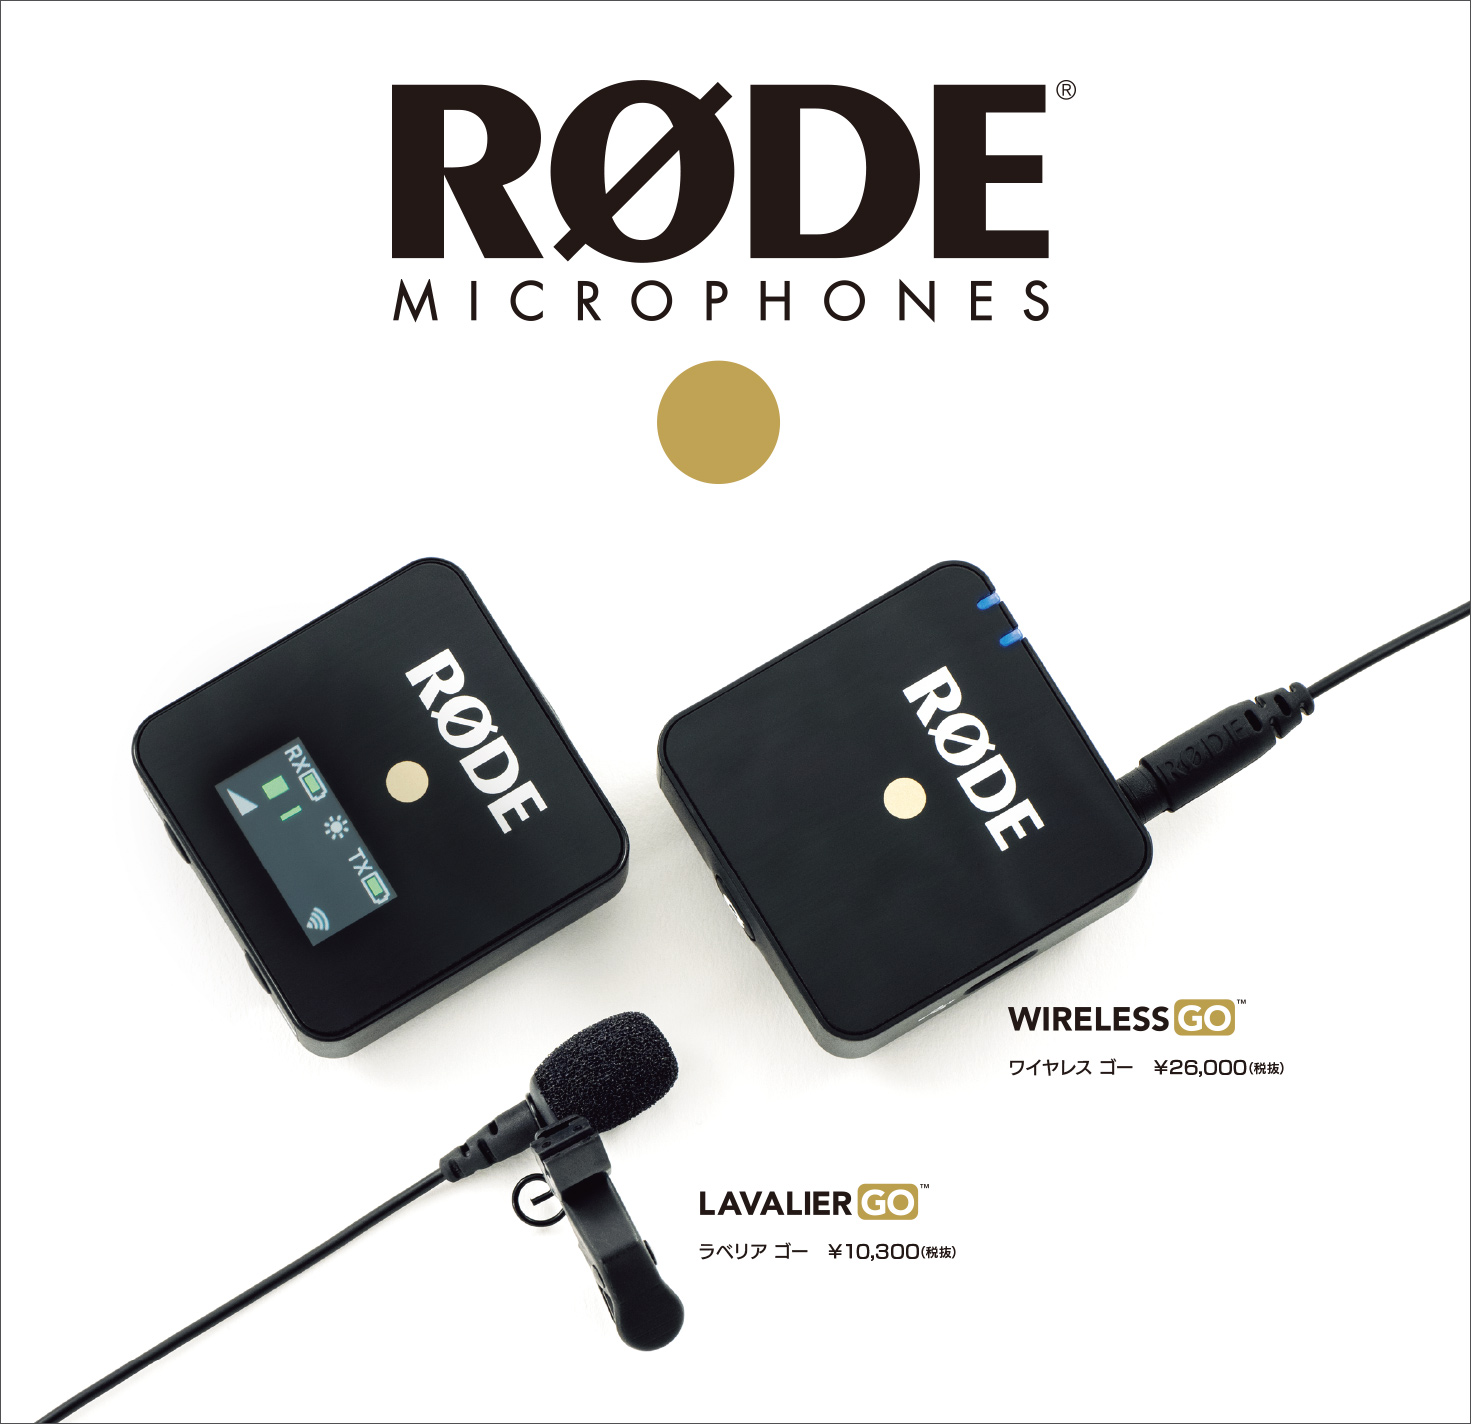 RODE ロード Wireless GO with ピンマイクミニステレオケーブル１本